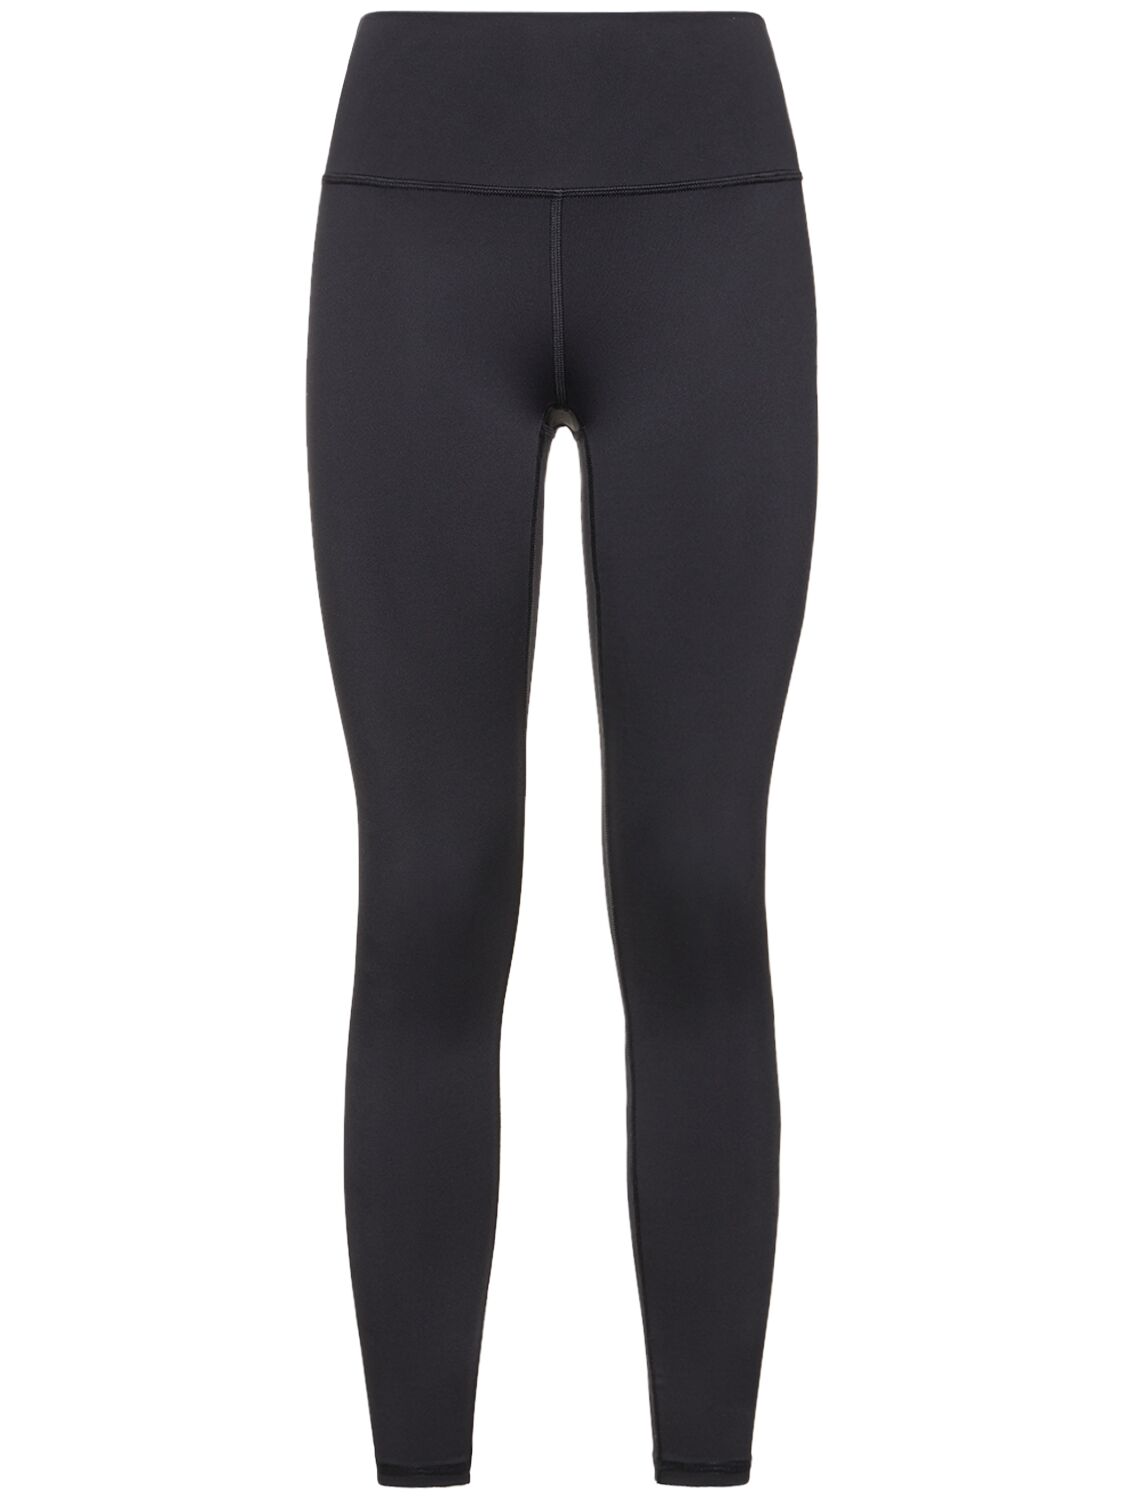 Image of Airlift 7/8 Stretch Tech Leggings